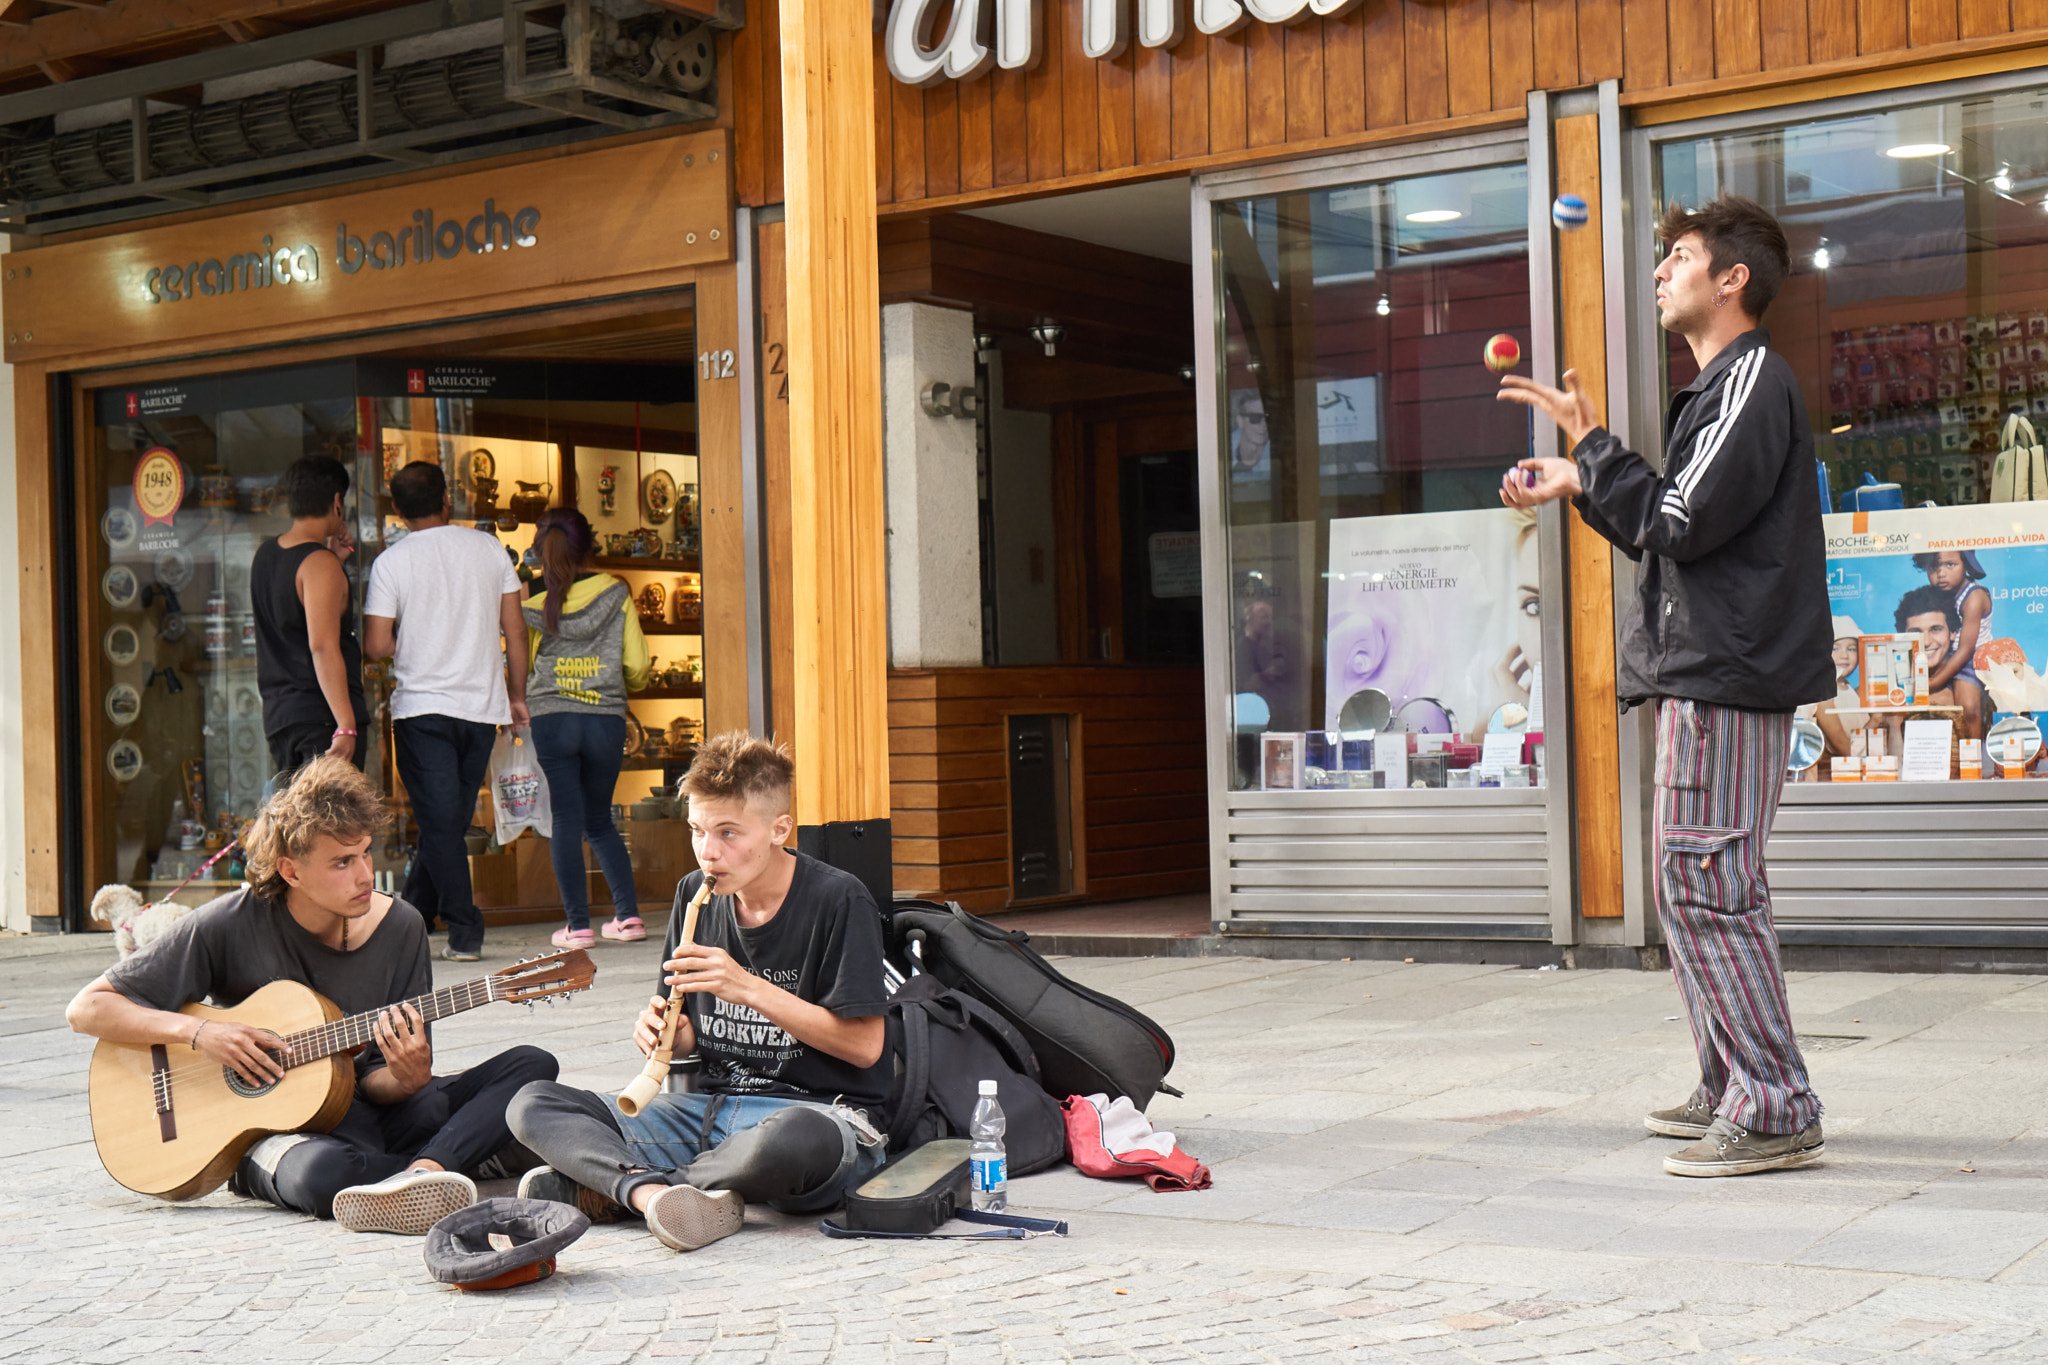 Sony a6000 sample photo. Street band and juggler photography